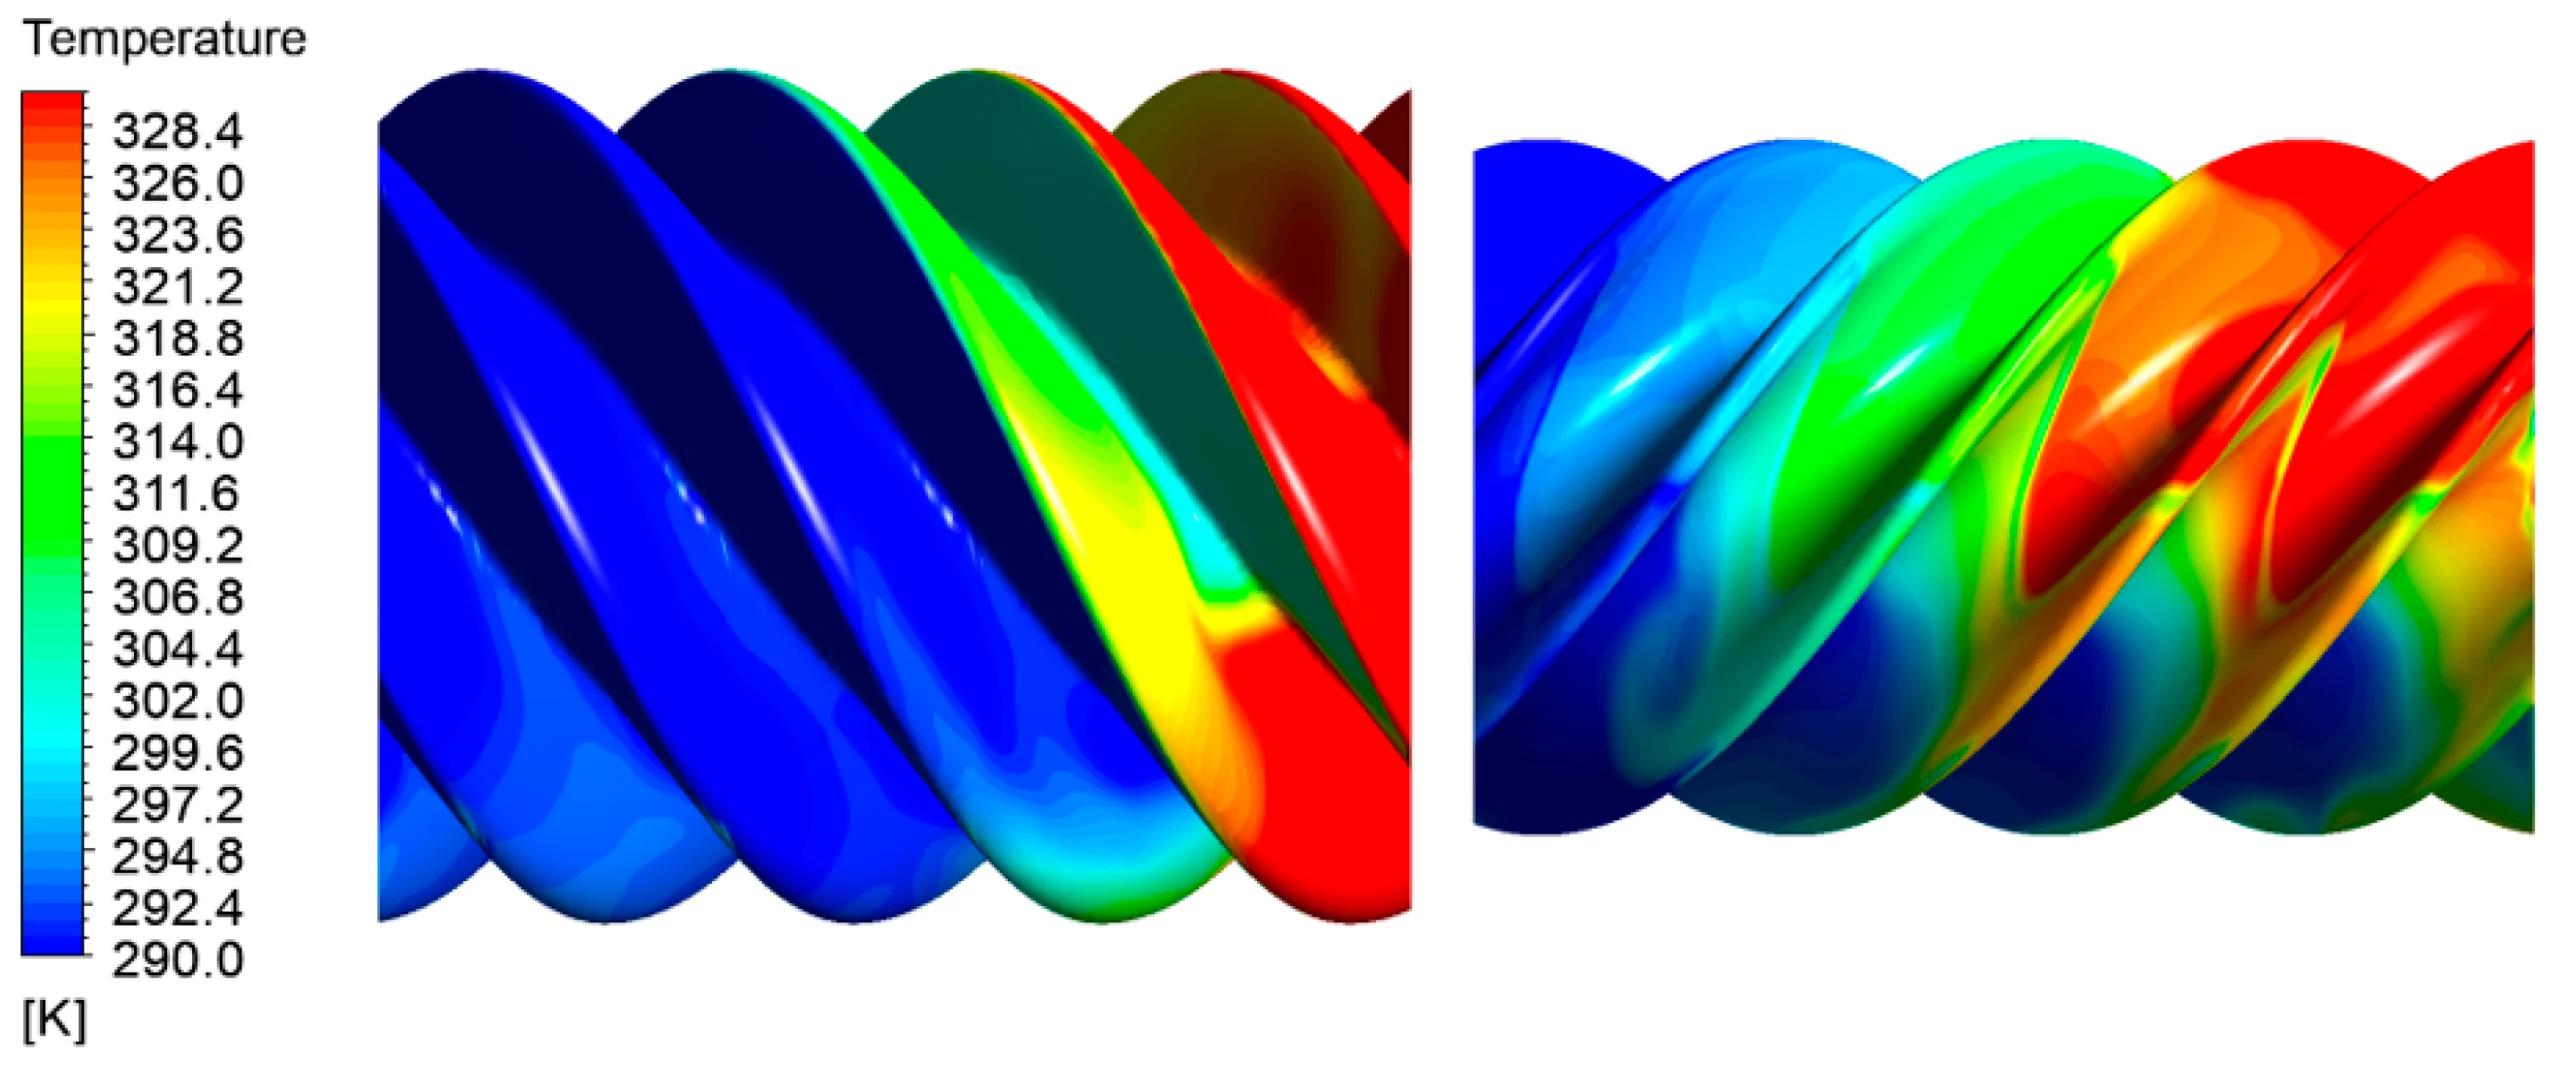 Temperature contours in male and female rotors